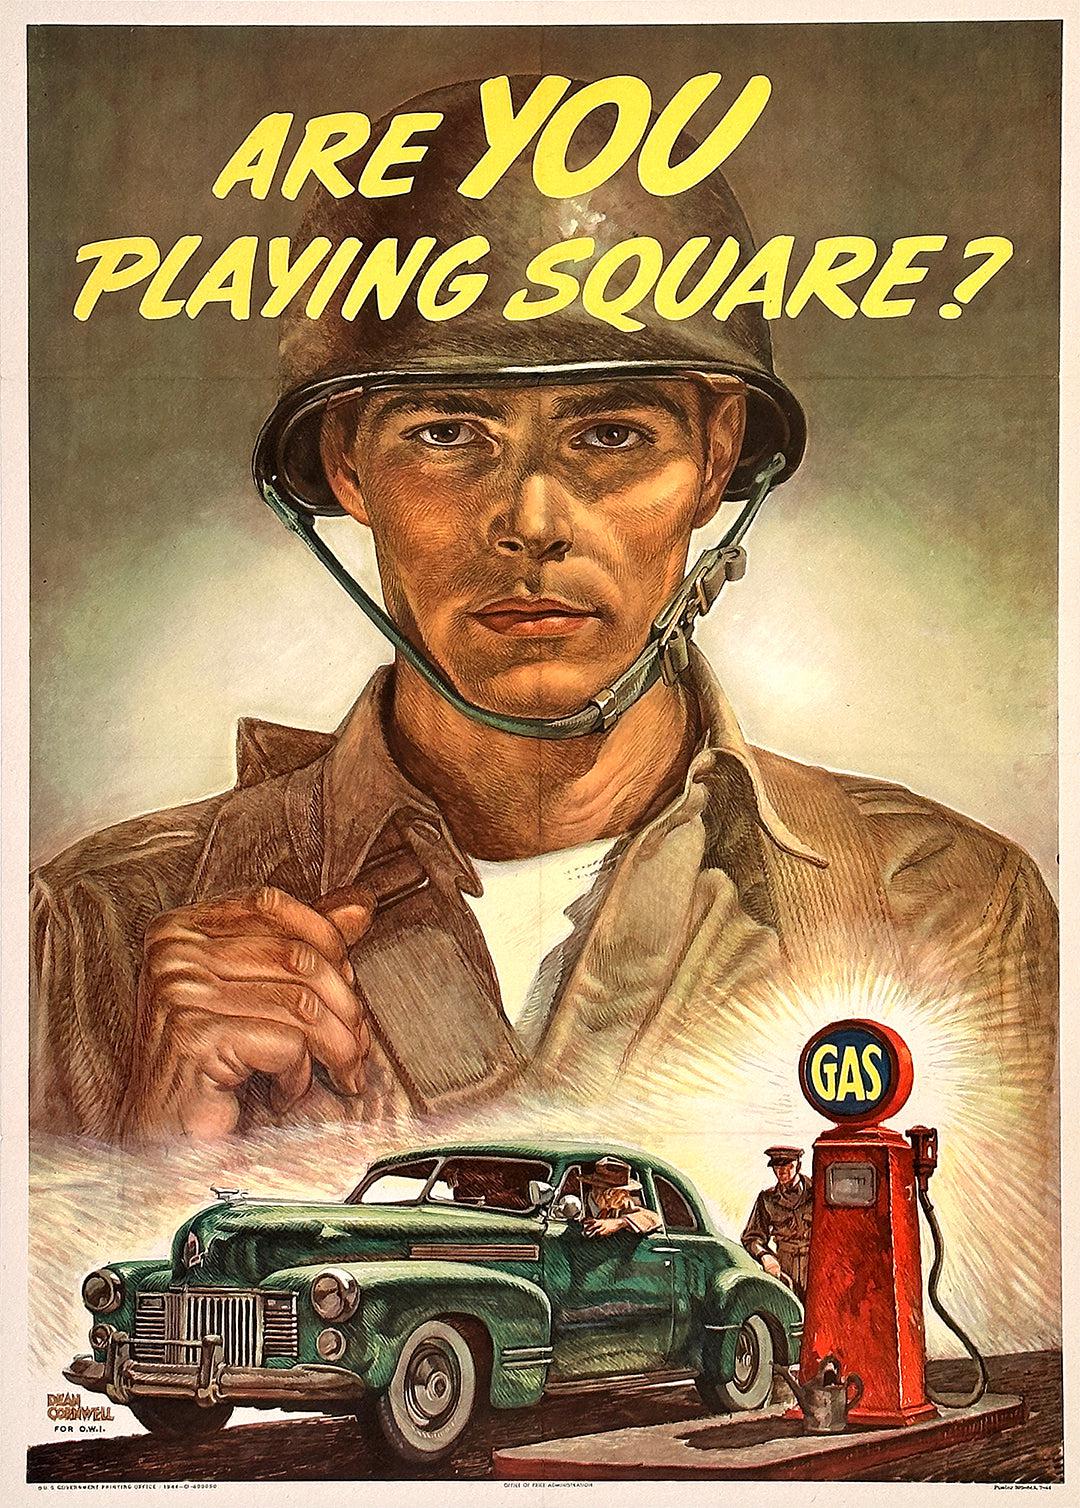 Original Vintage WWII Poster Are You Playing Square Gas Prices Dean Cornwell 1944